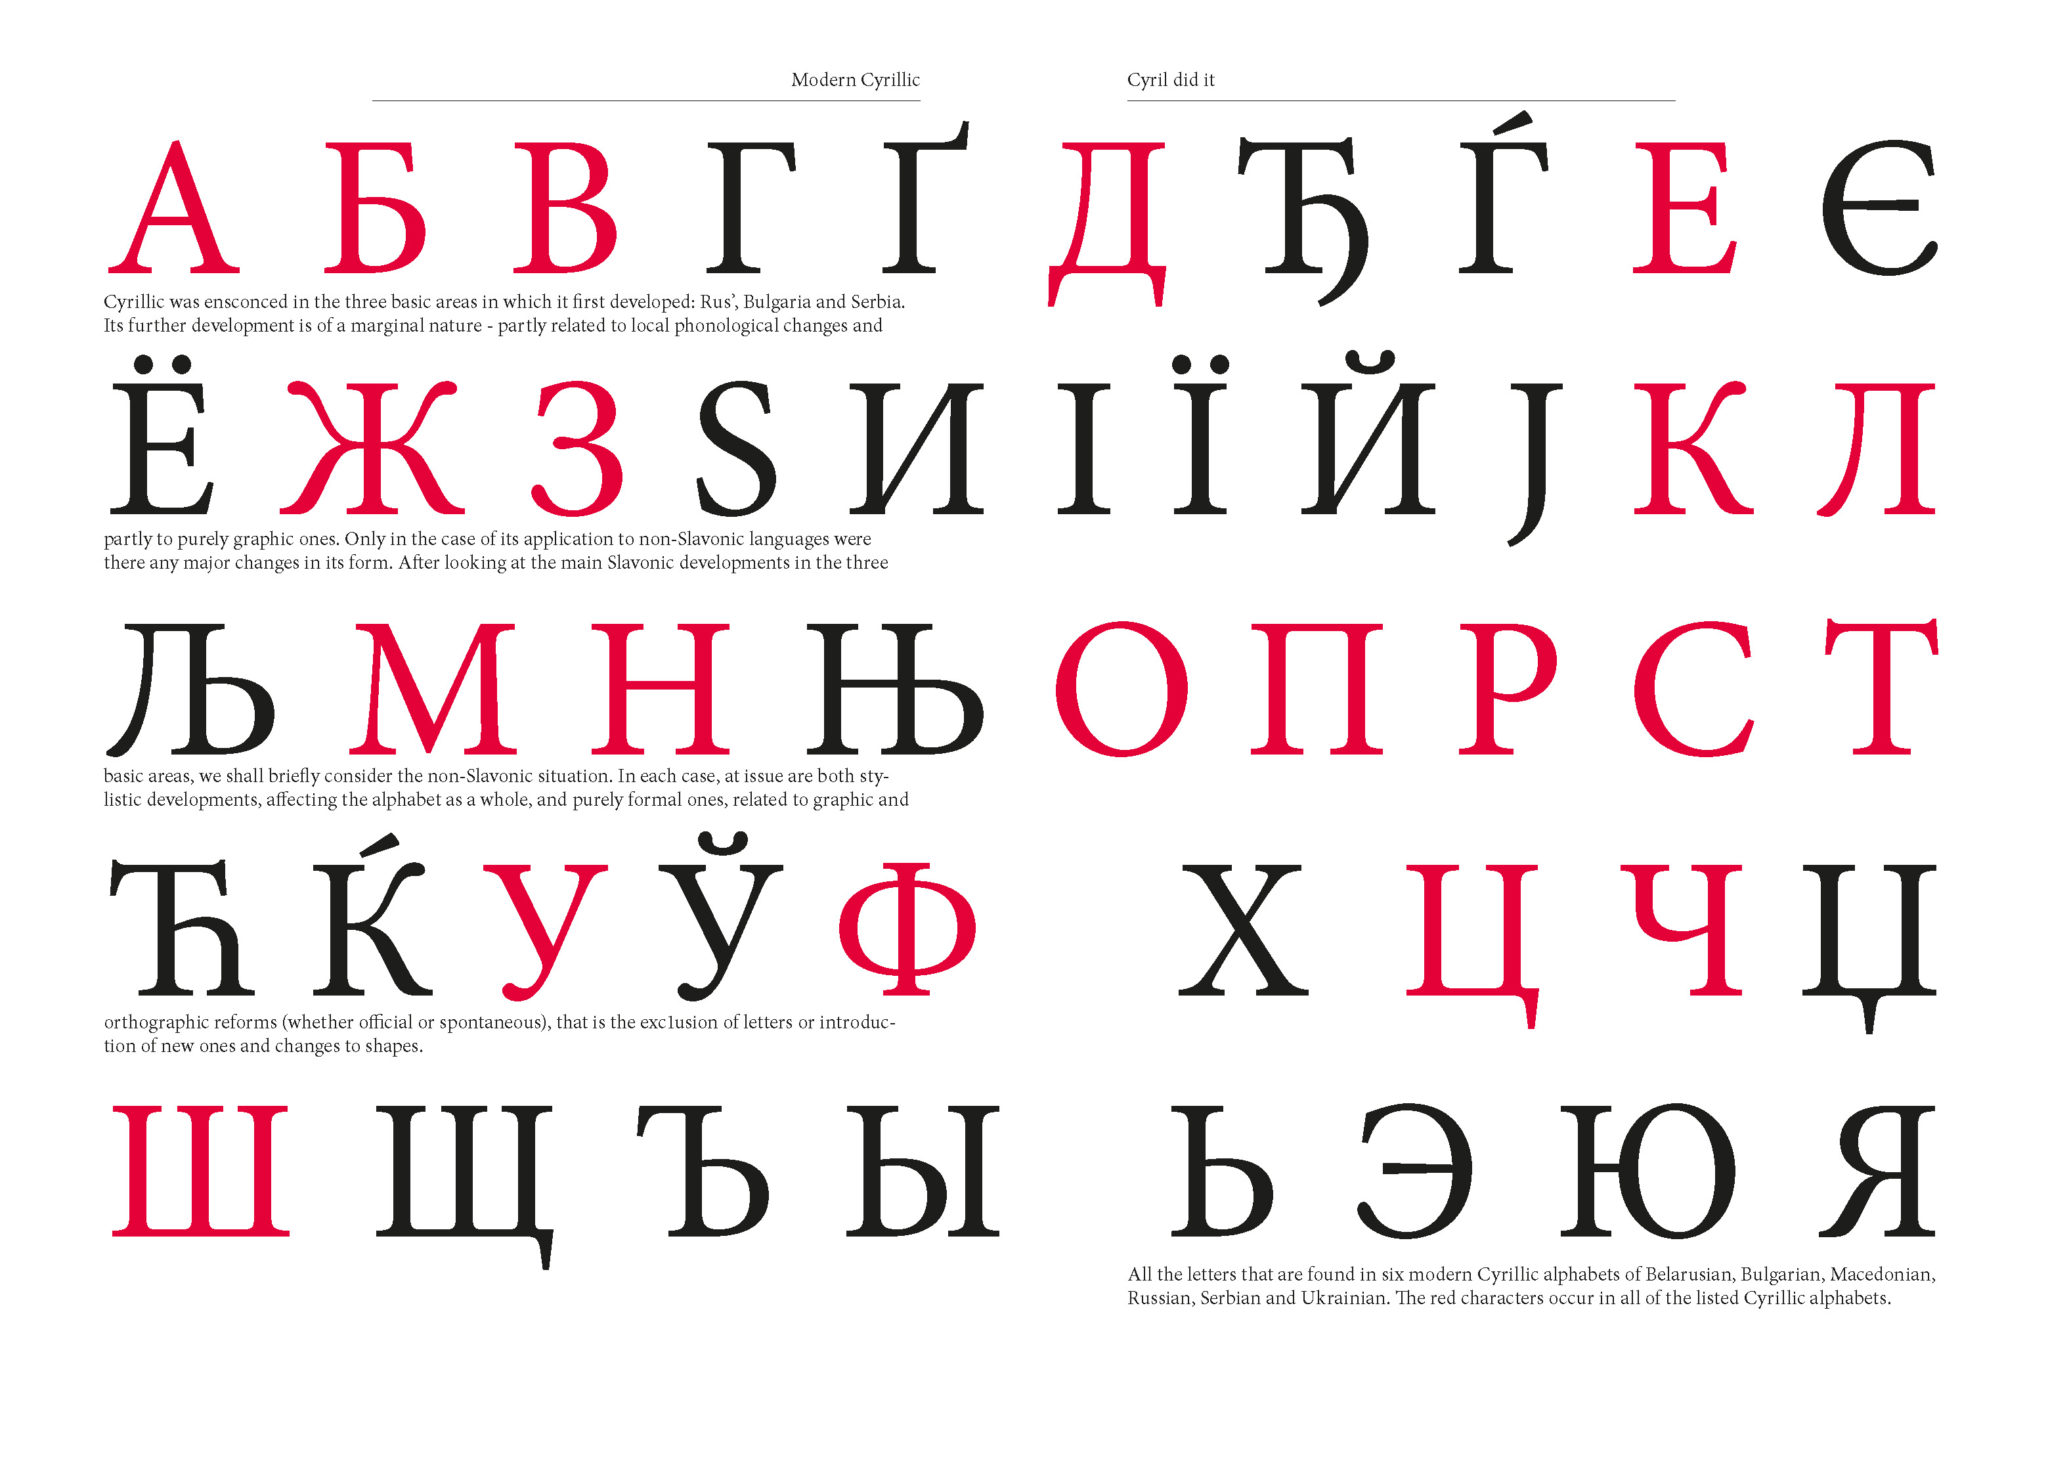 Cyril did it: A celebration of the Cyrillic alphabet - Local Fonts